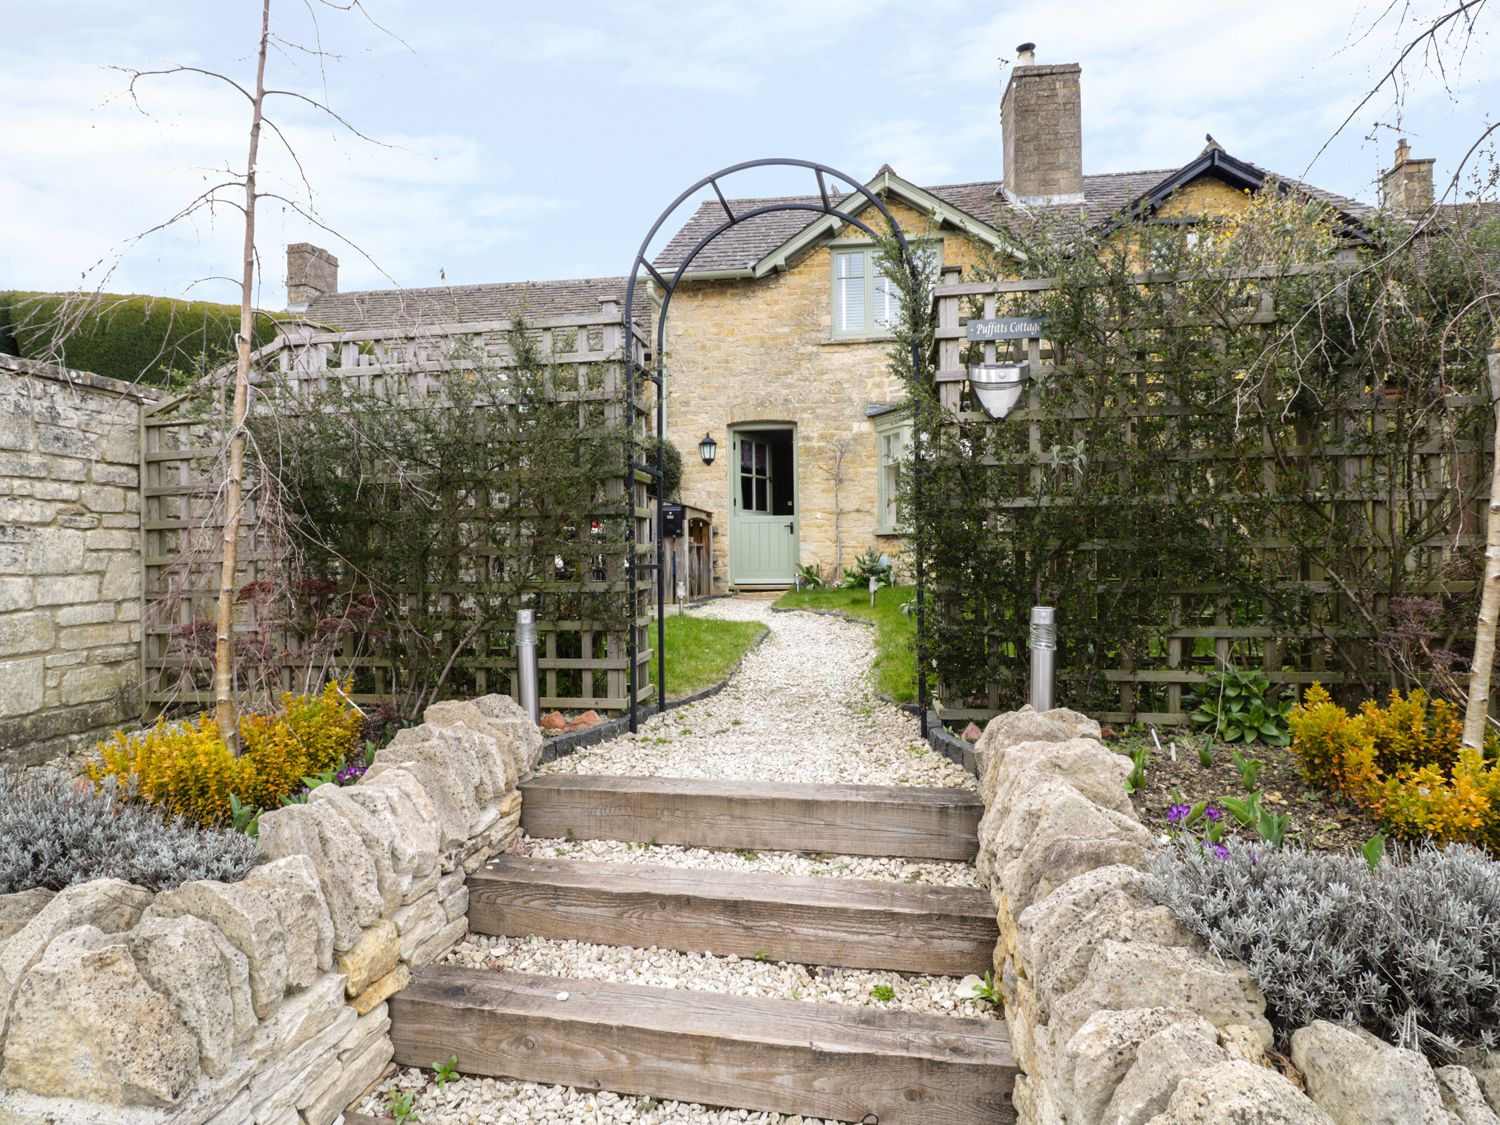 Puffitts Cottage - Cotswolds - 979435 - photo 1